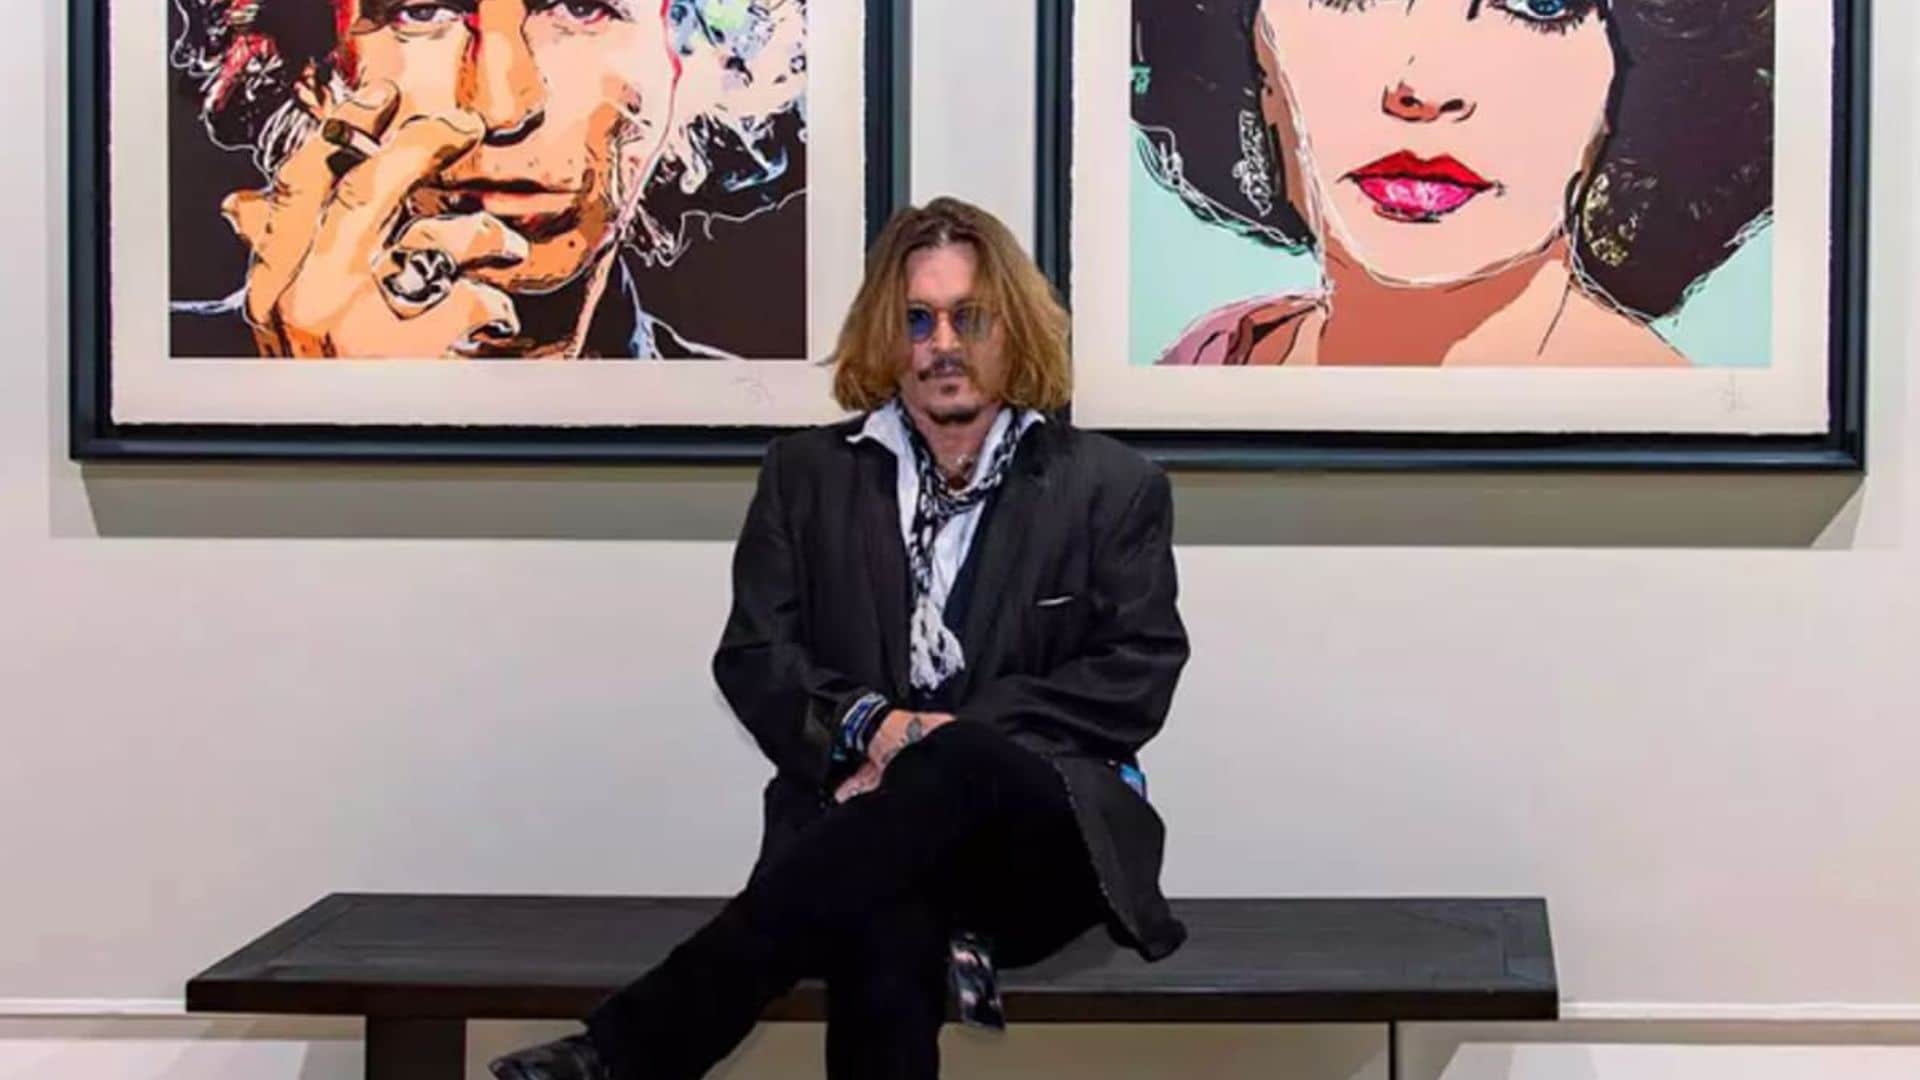 Johnny Depp earns $3.6 million within hours of debuting his art collection